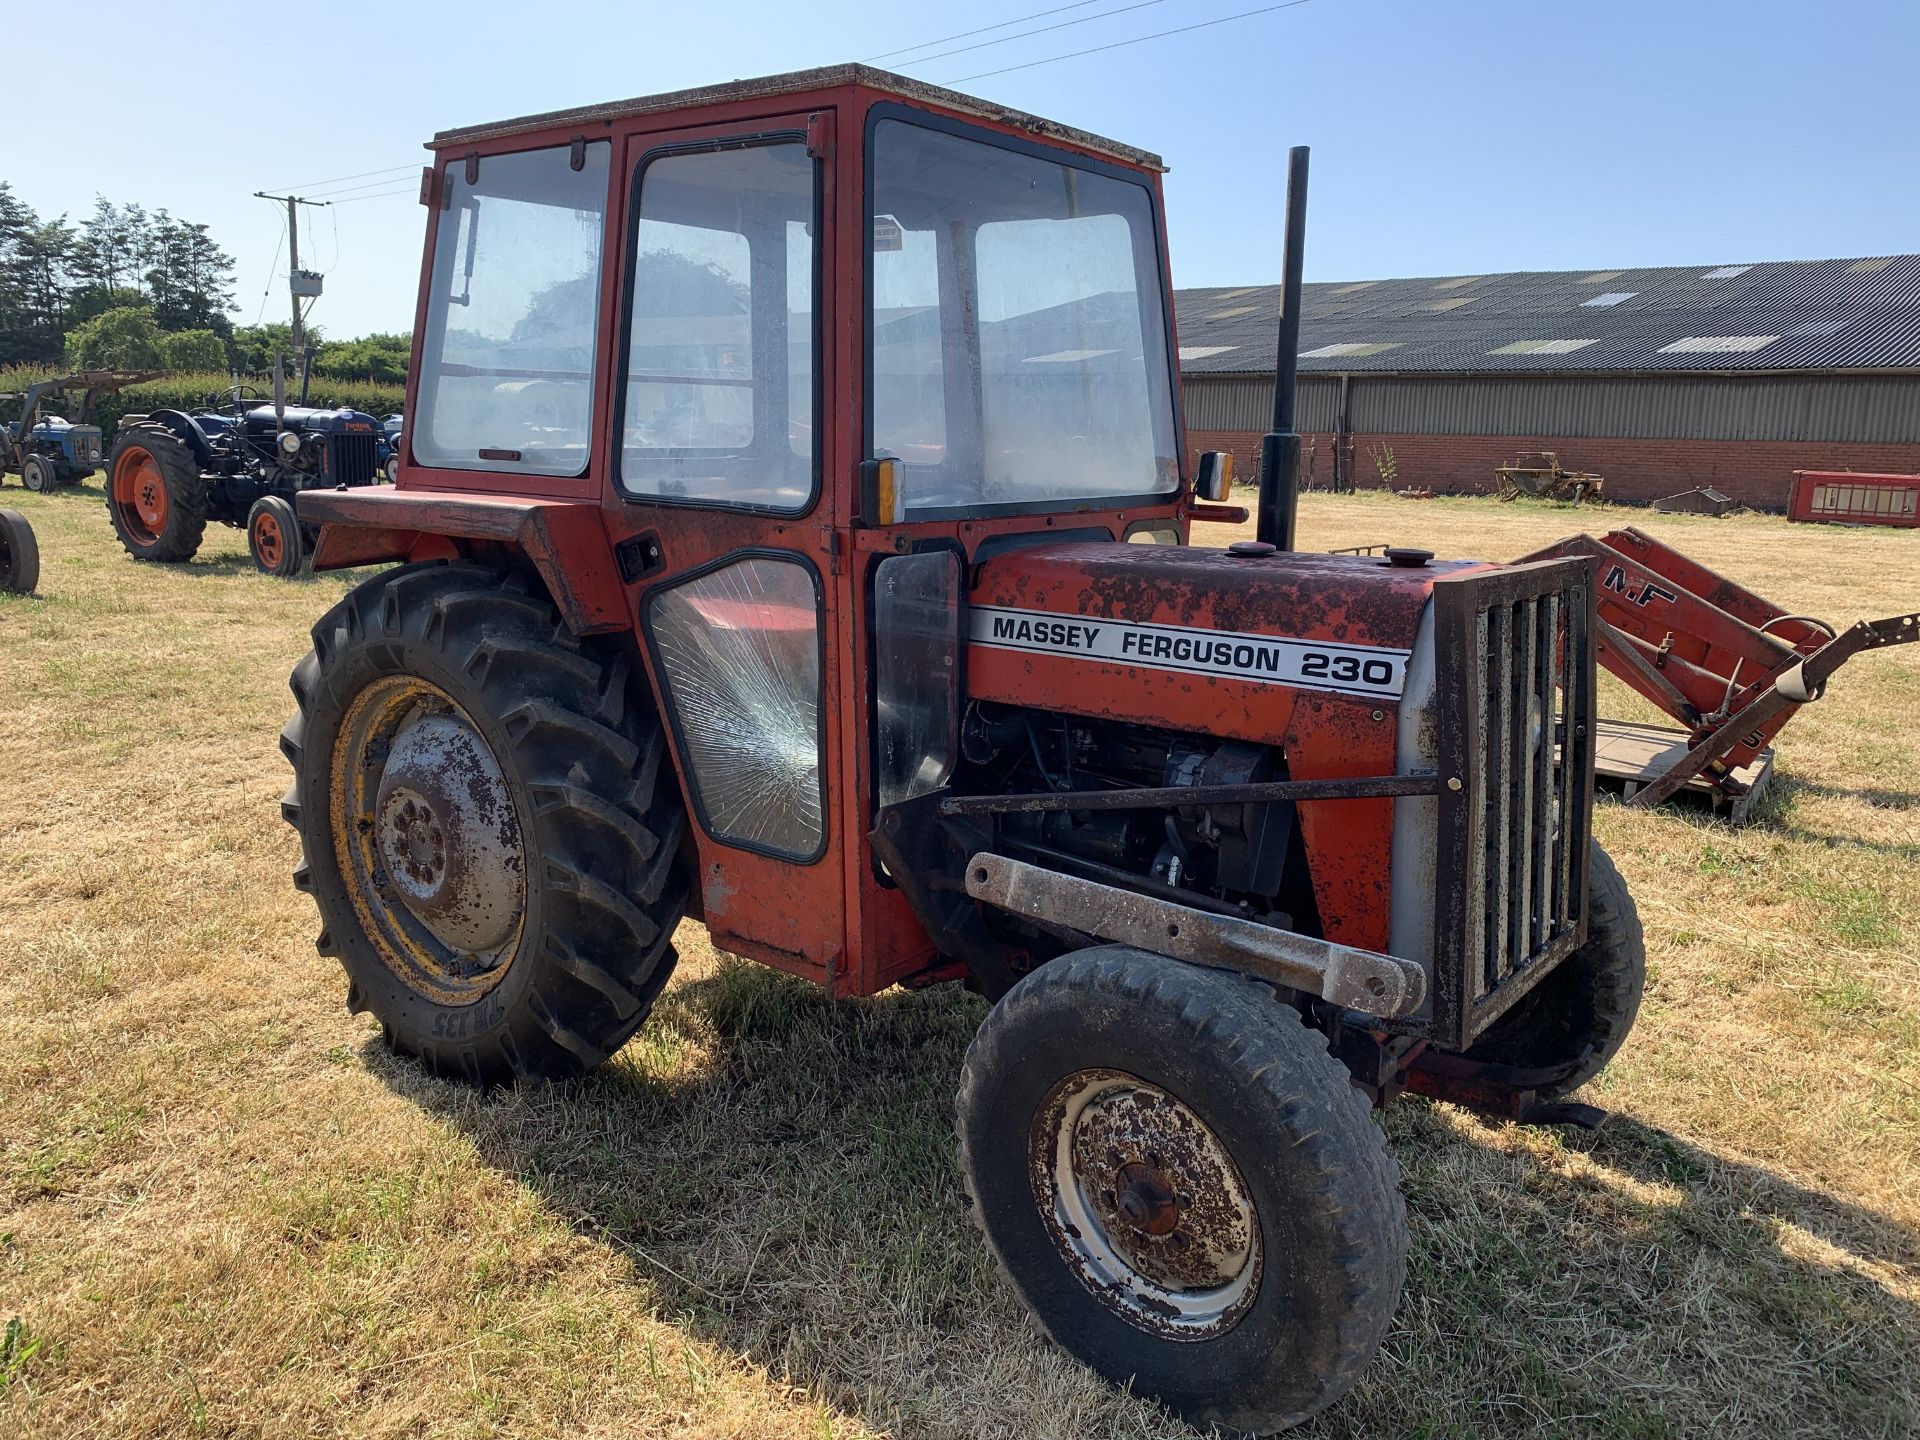 Massey Ferguson 230 tractor, B813 XAG, 3255 hours, with MF 75 front loader - Image 6 of 6